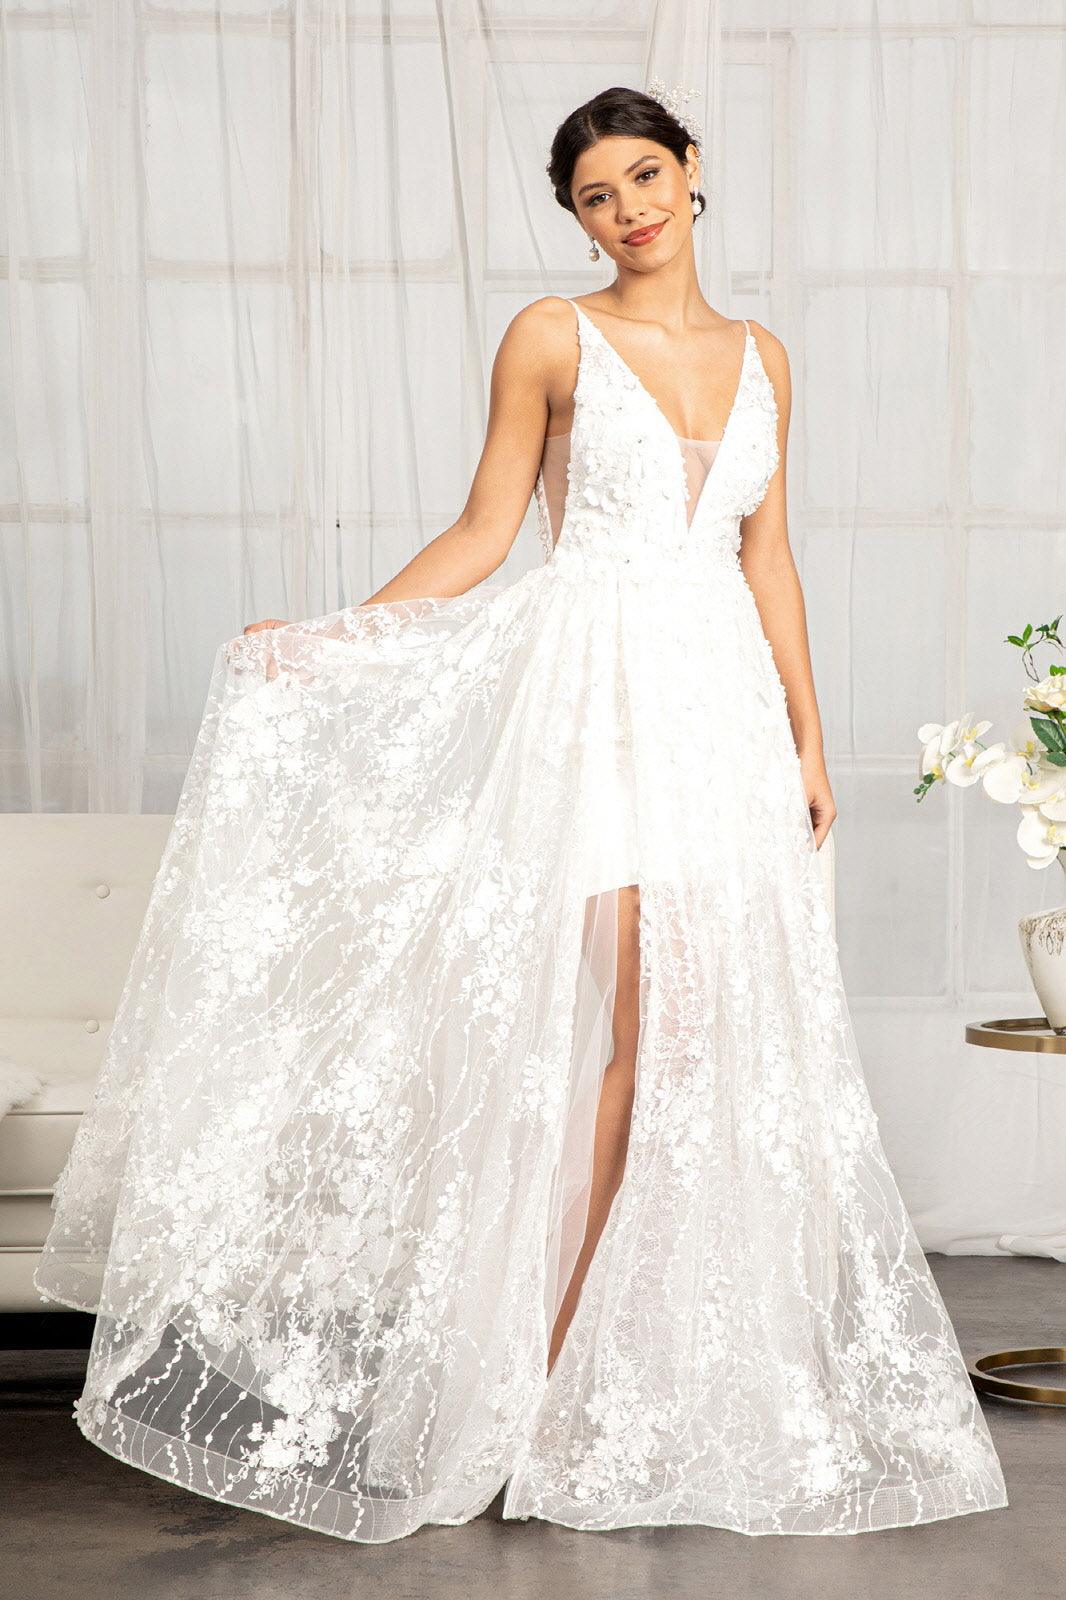 Long Spaghetti Strap Floral Applique Wedding Dress for $566.99 – The Dress  Outlet